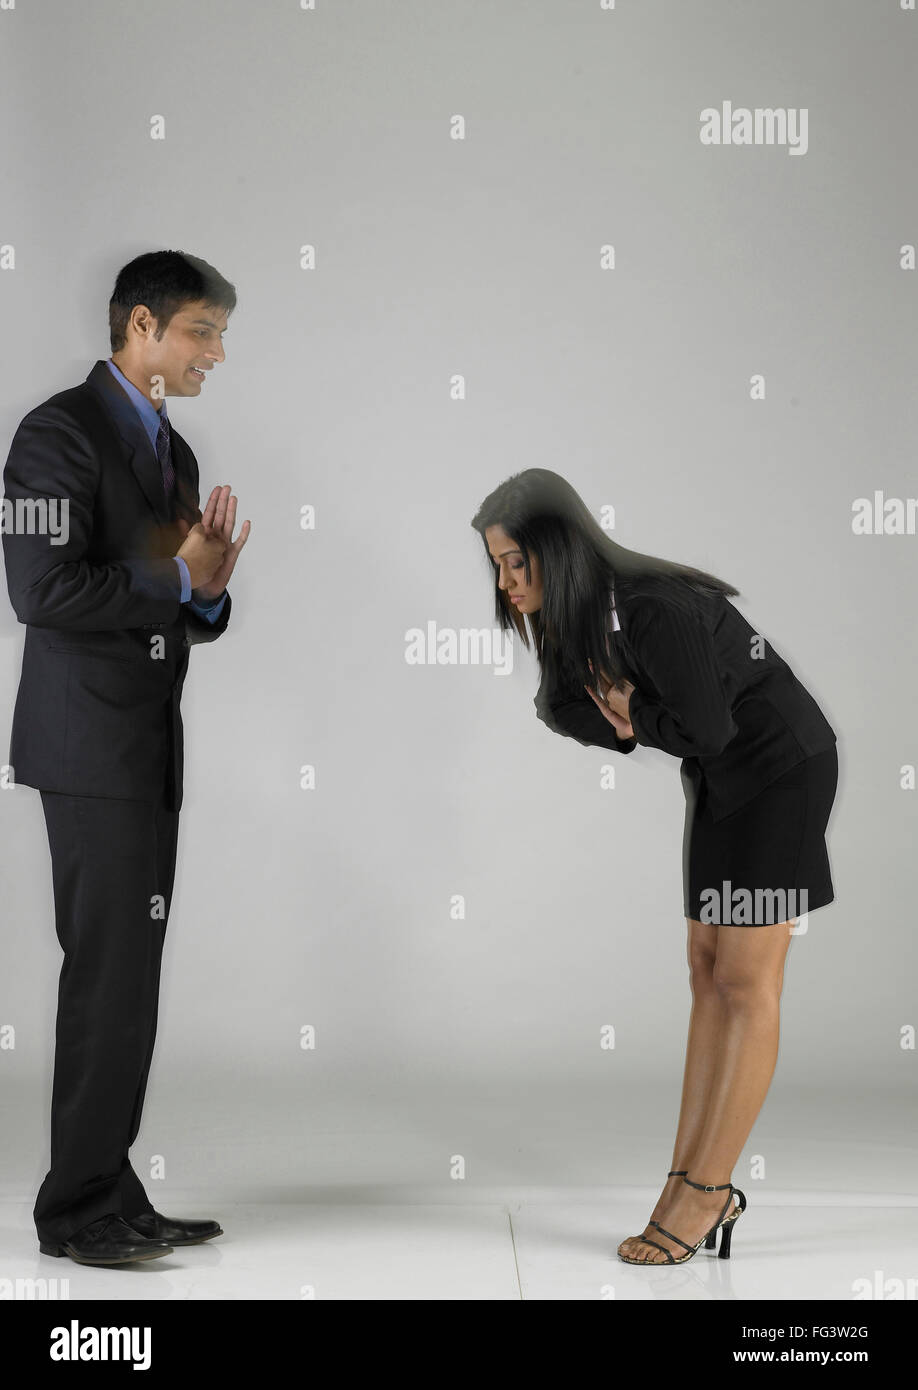 vda 202273 - Woman bowing in front of man - Model Release Stock Photo